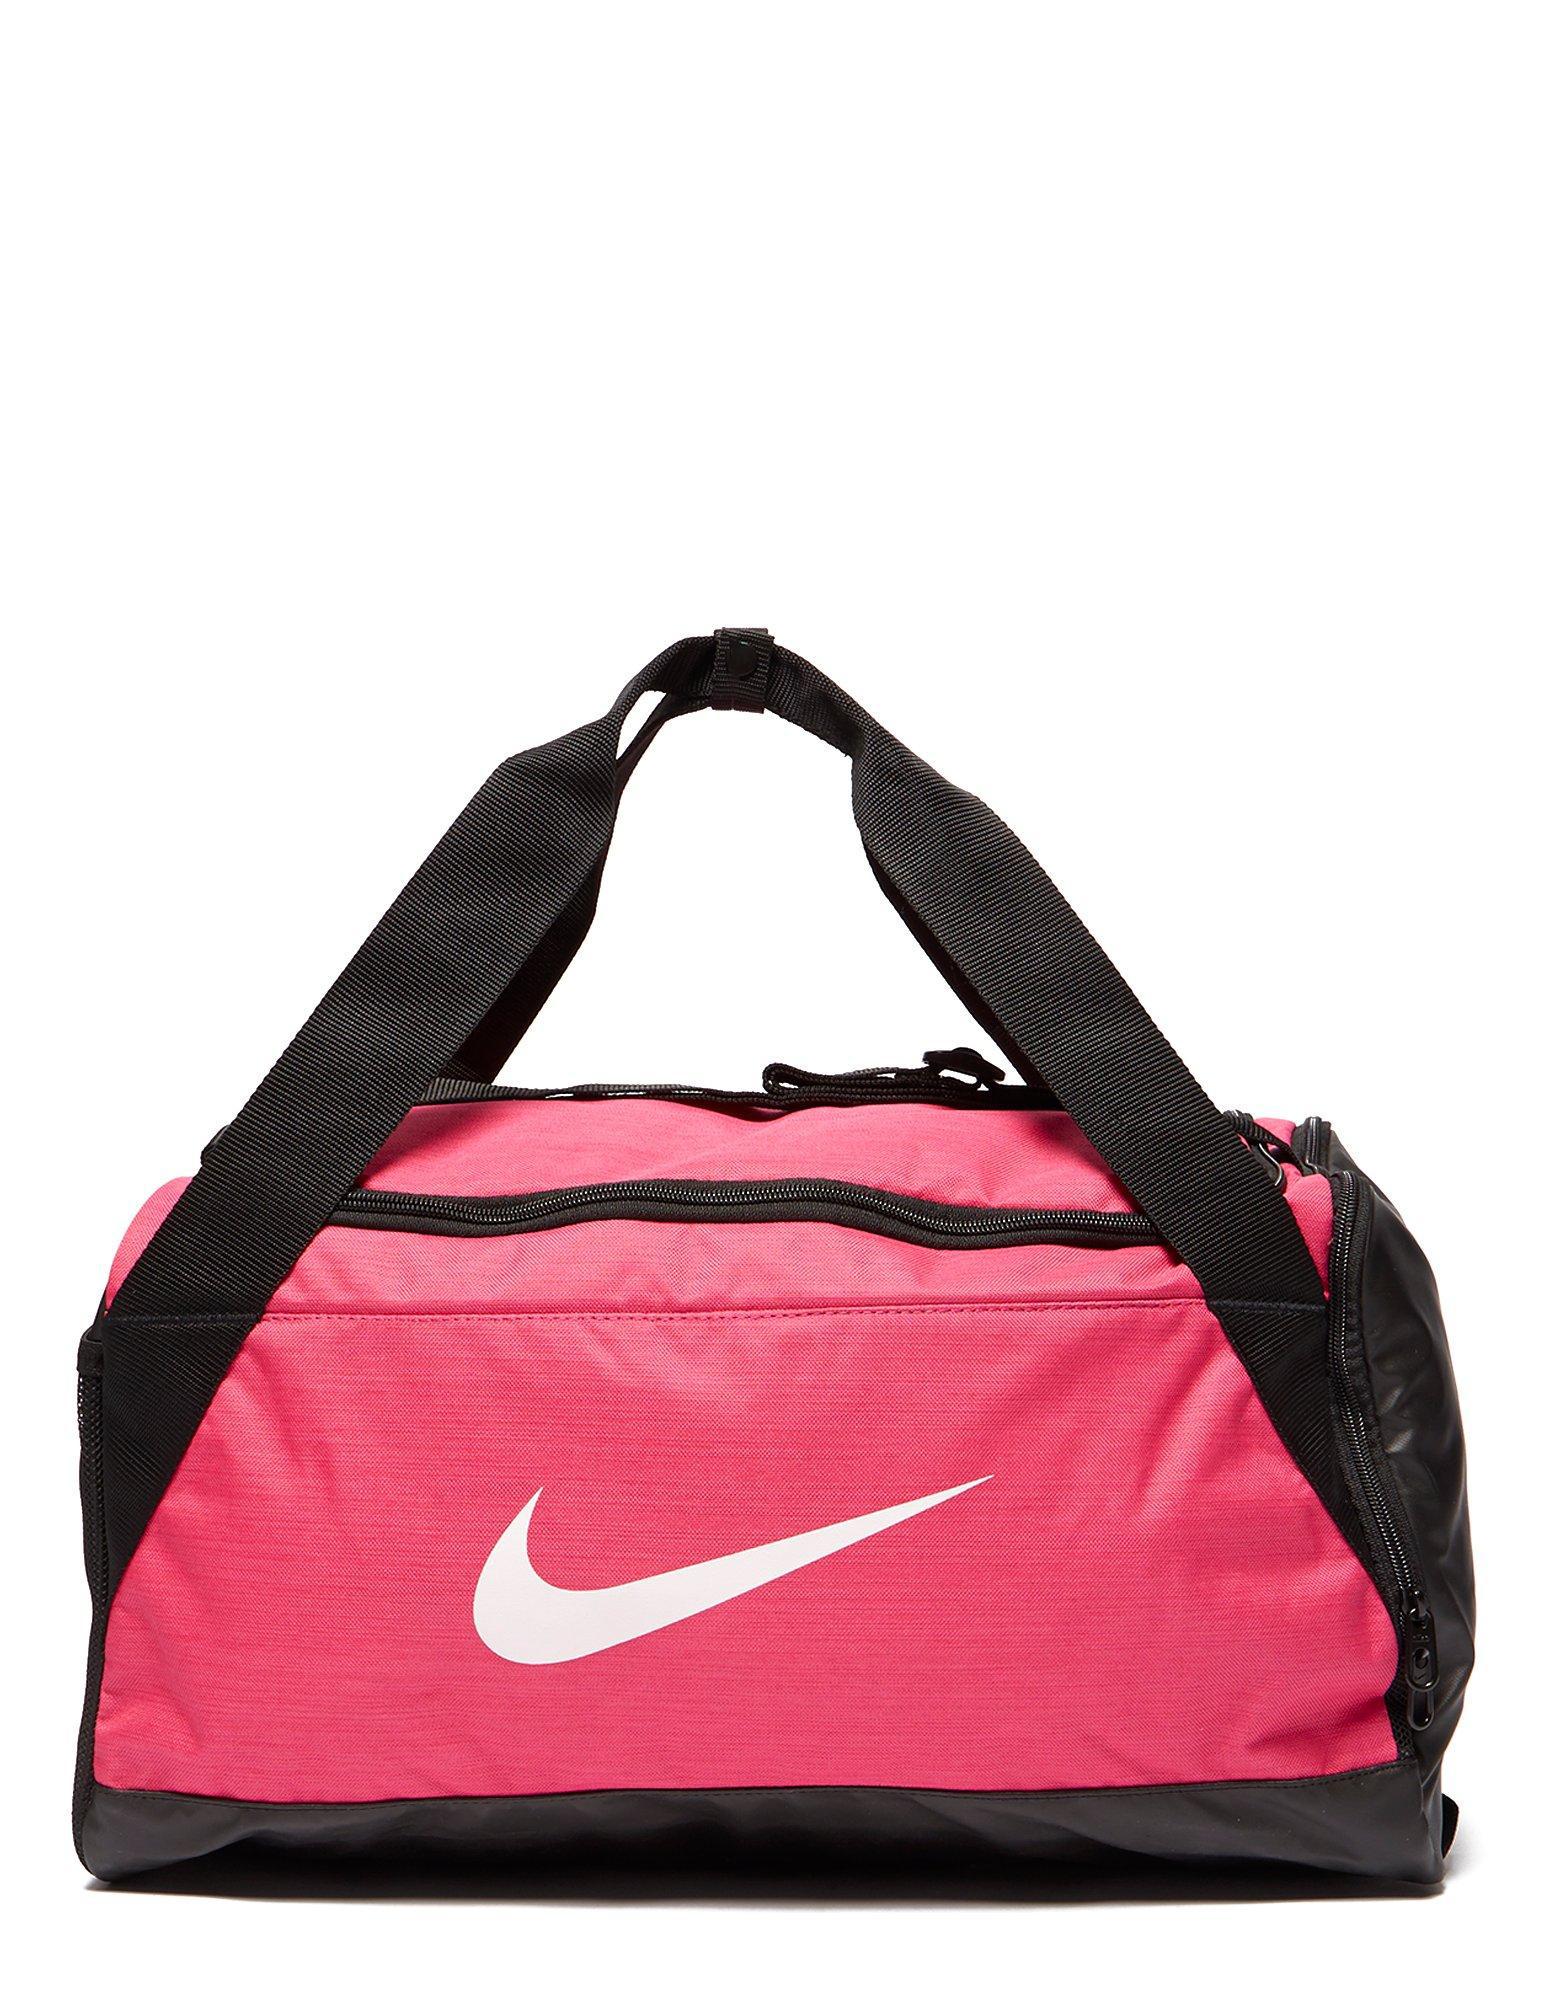 Nike Synthetic Brasilia Small Duffle Bag in Pink - Lyst